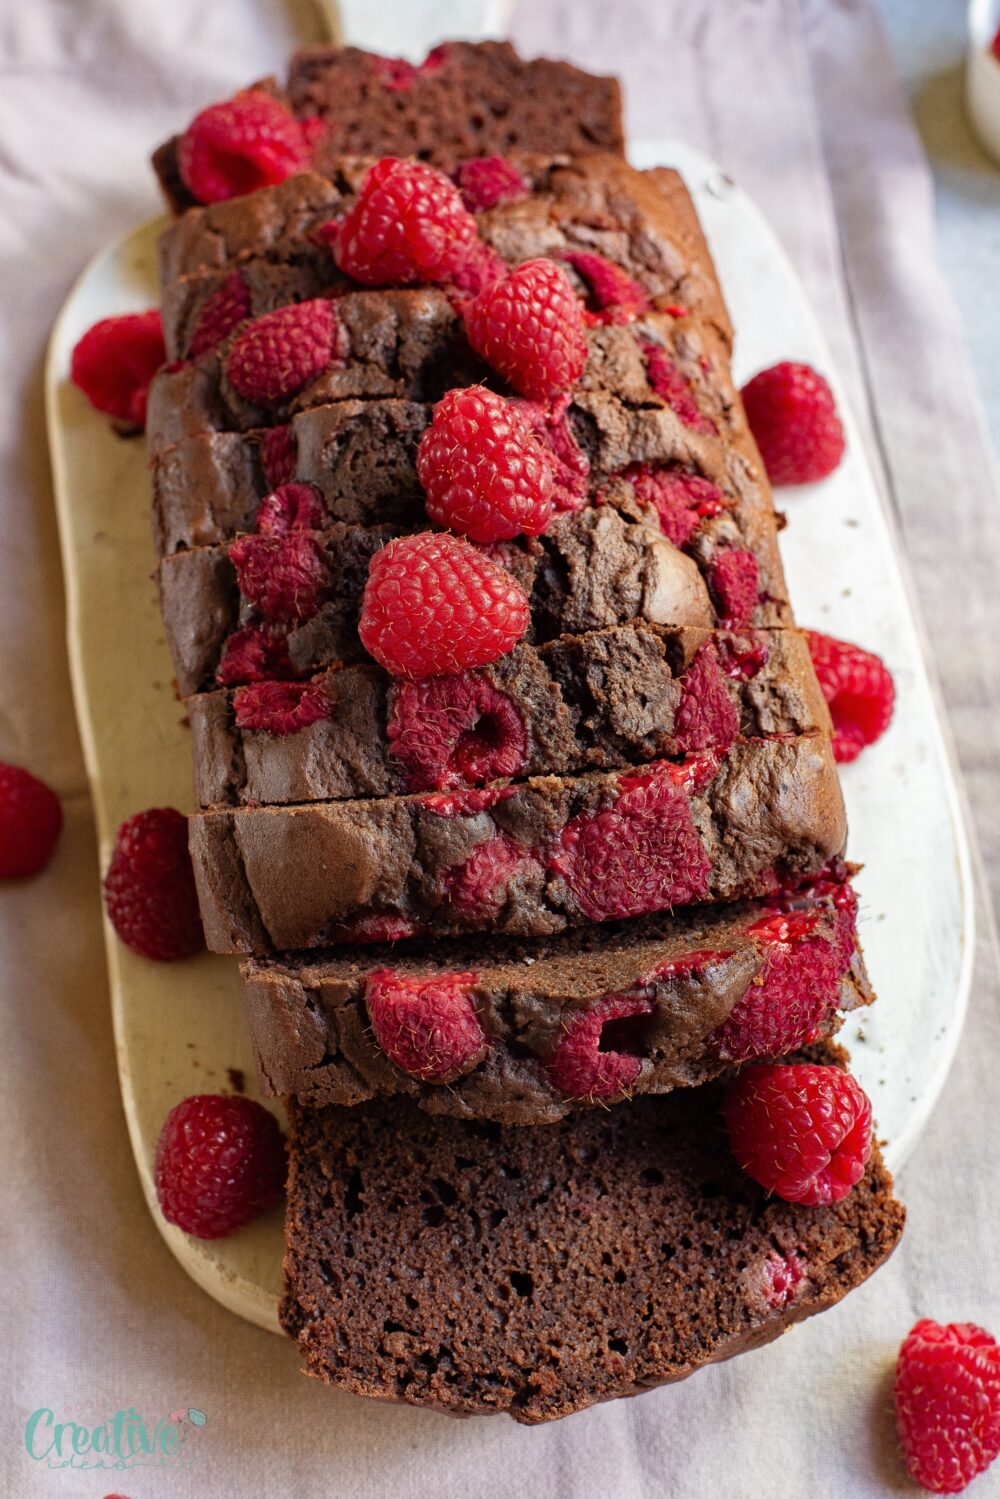 Indulgent chocolate pound cake - follow the simple steps for a moist and delightful treat. Perfect for any occasion!